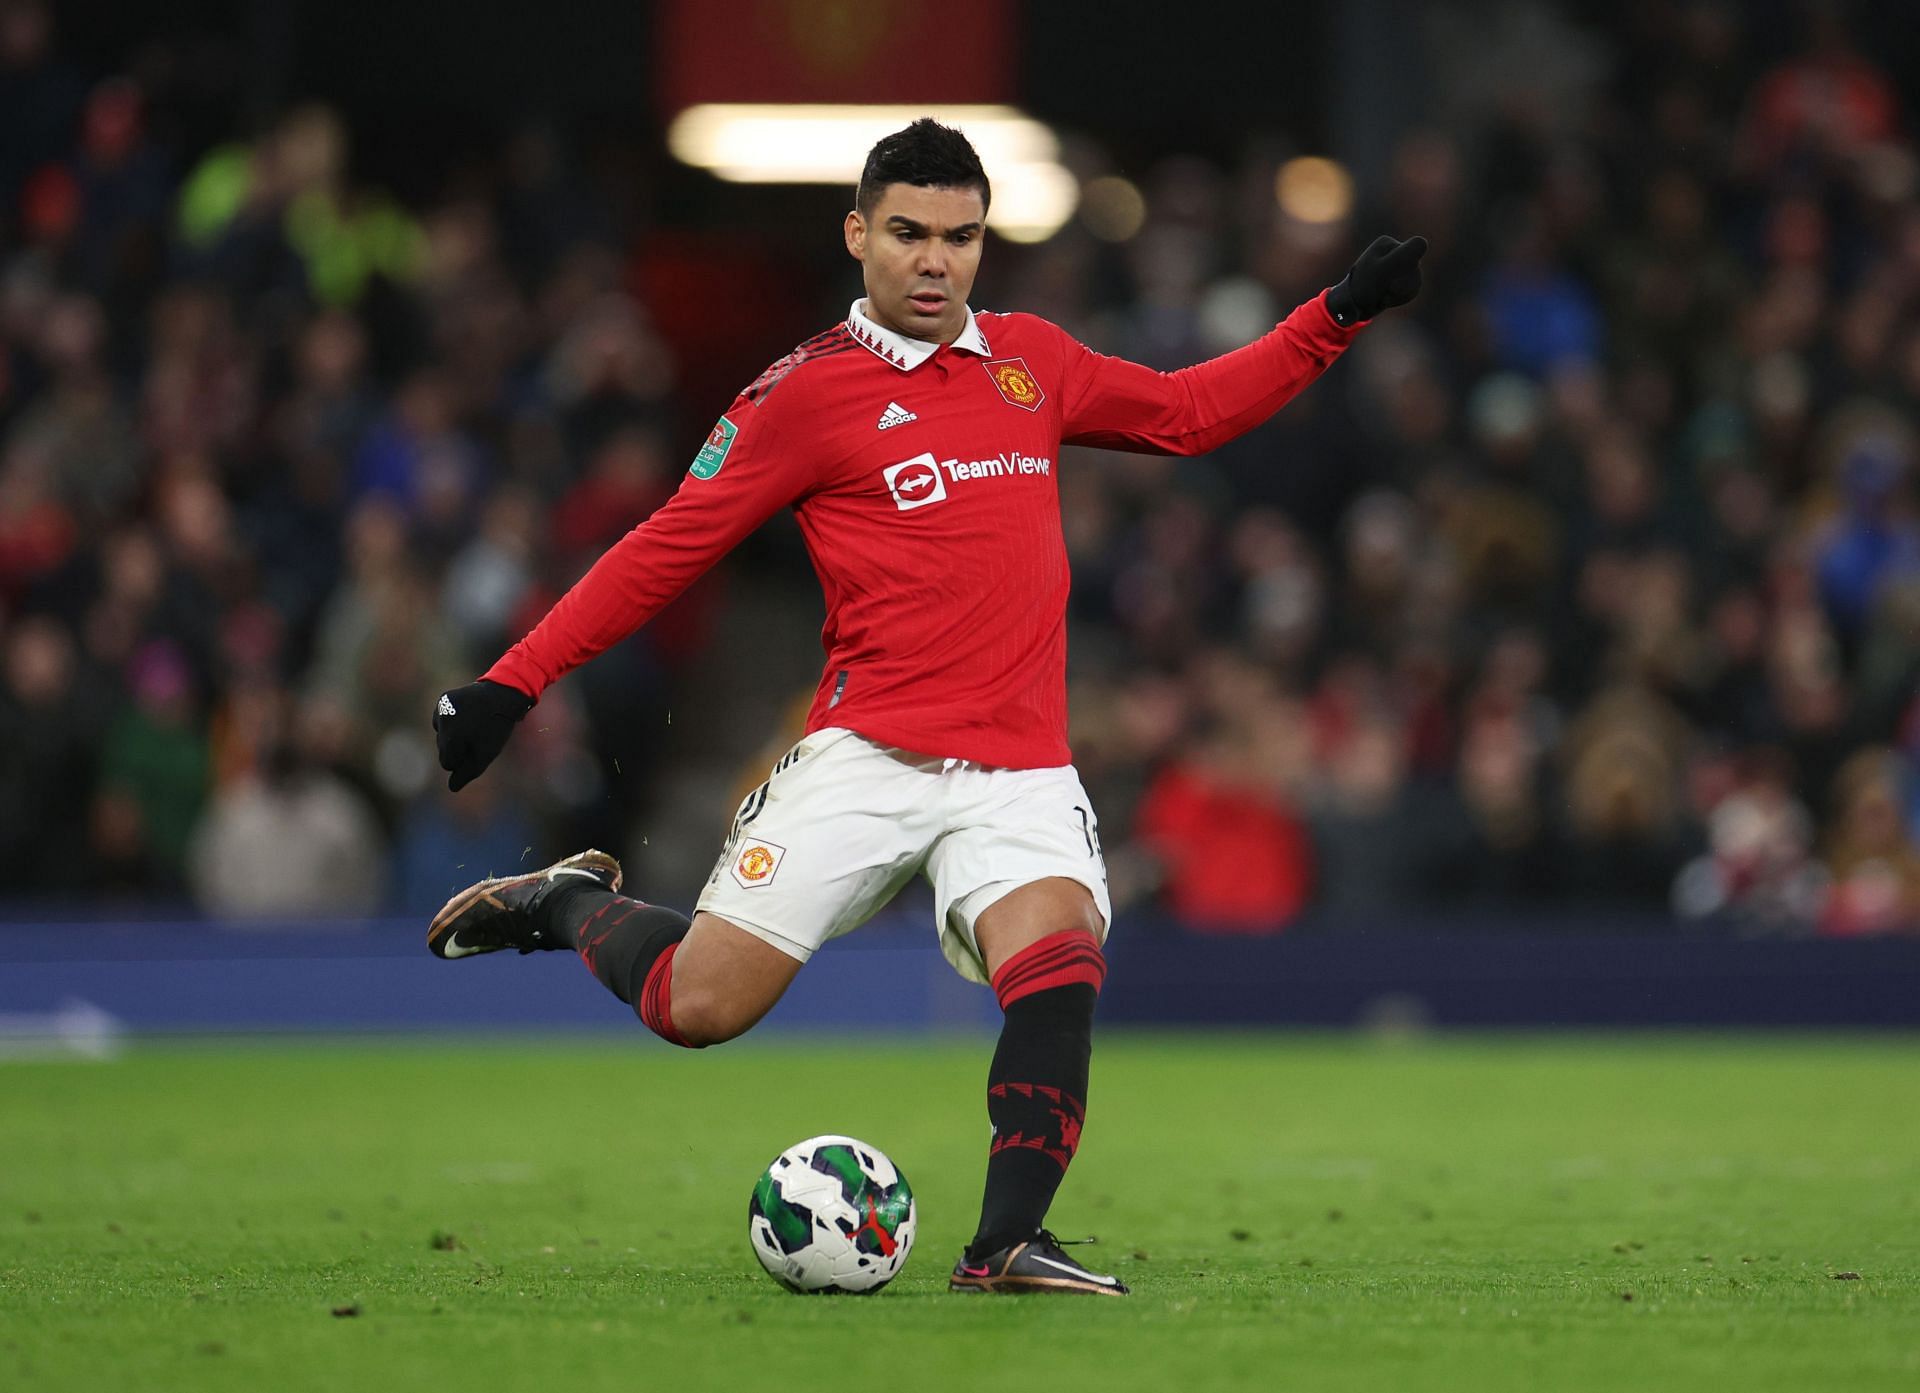 Casemiro is likely to come back into the United team.